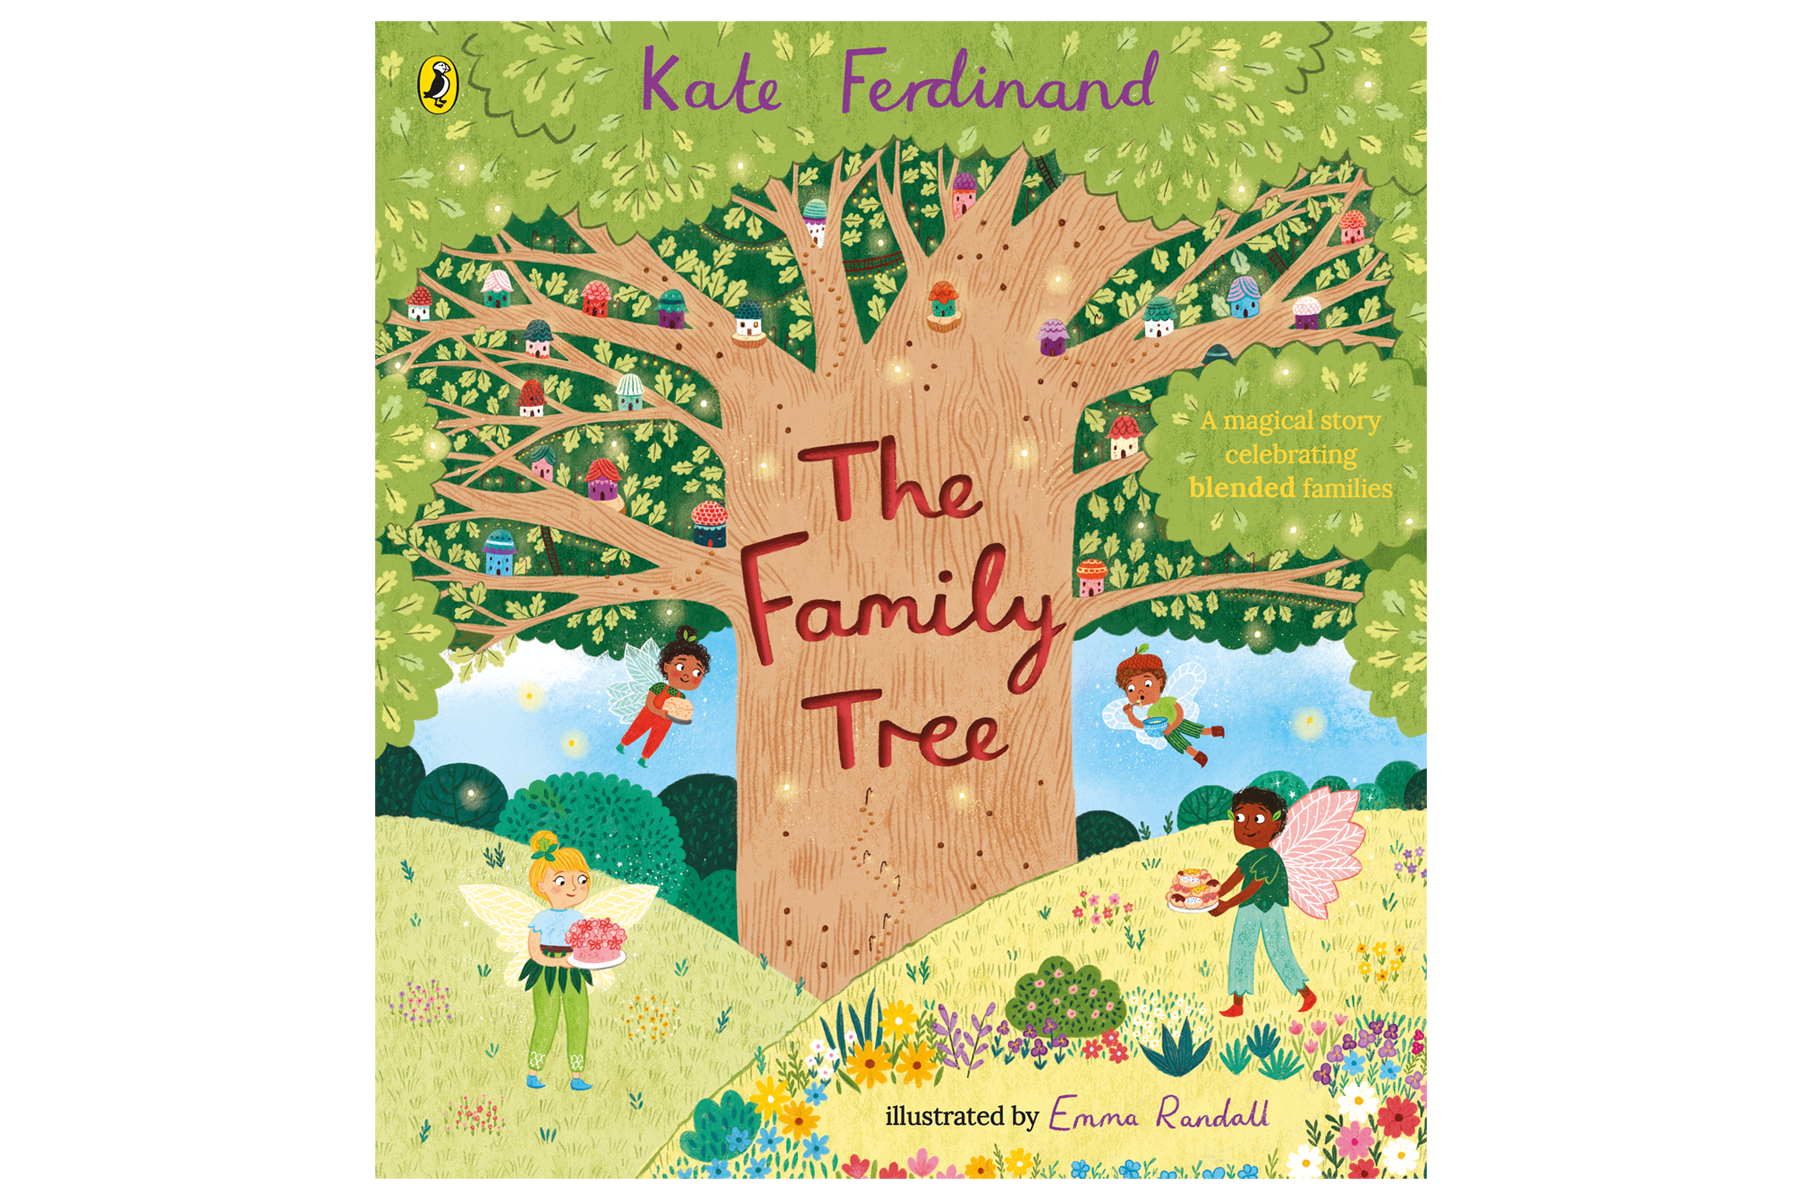 An image of the new book by Kate Ferdinand, The Family Tree. The book cover features an illustration of a beautiful tree with a family of four fairies surrounding it